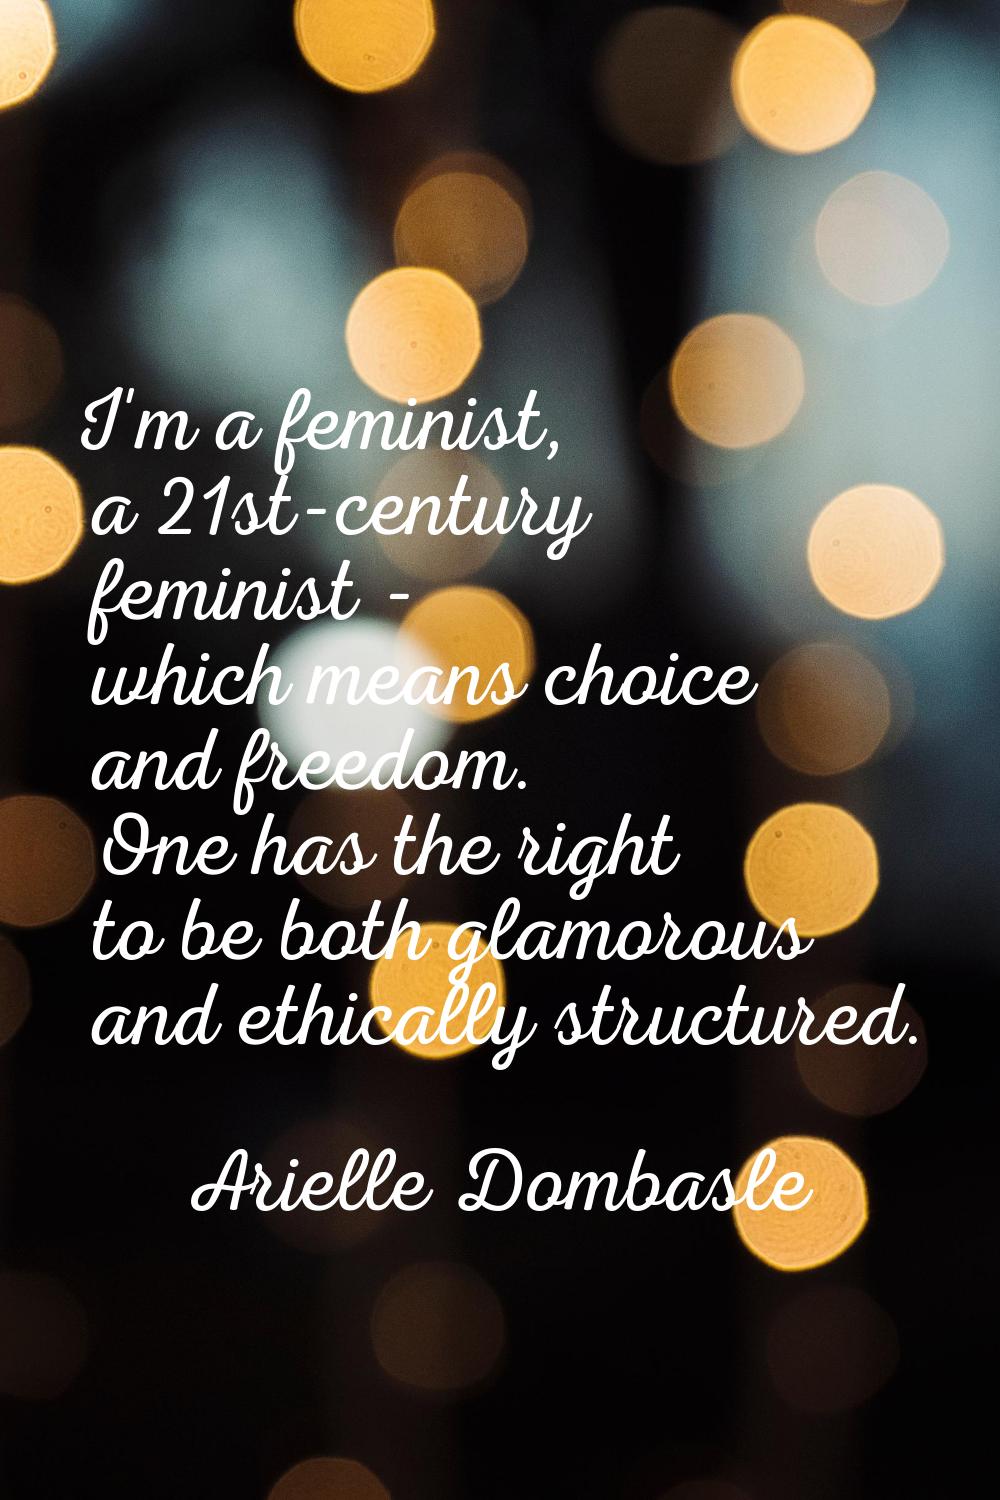 I'm a feminist, a 21st-century feminist - which means choice and freedom. One has the right to be b